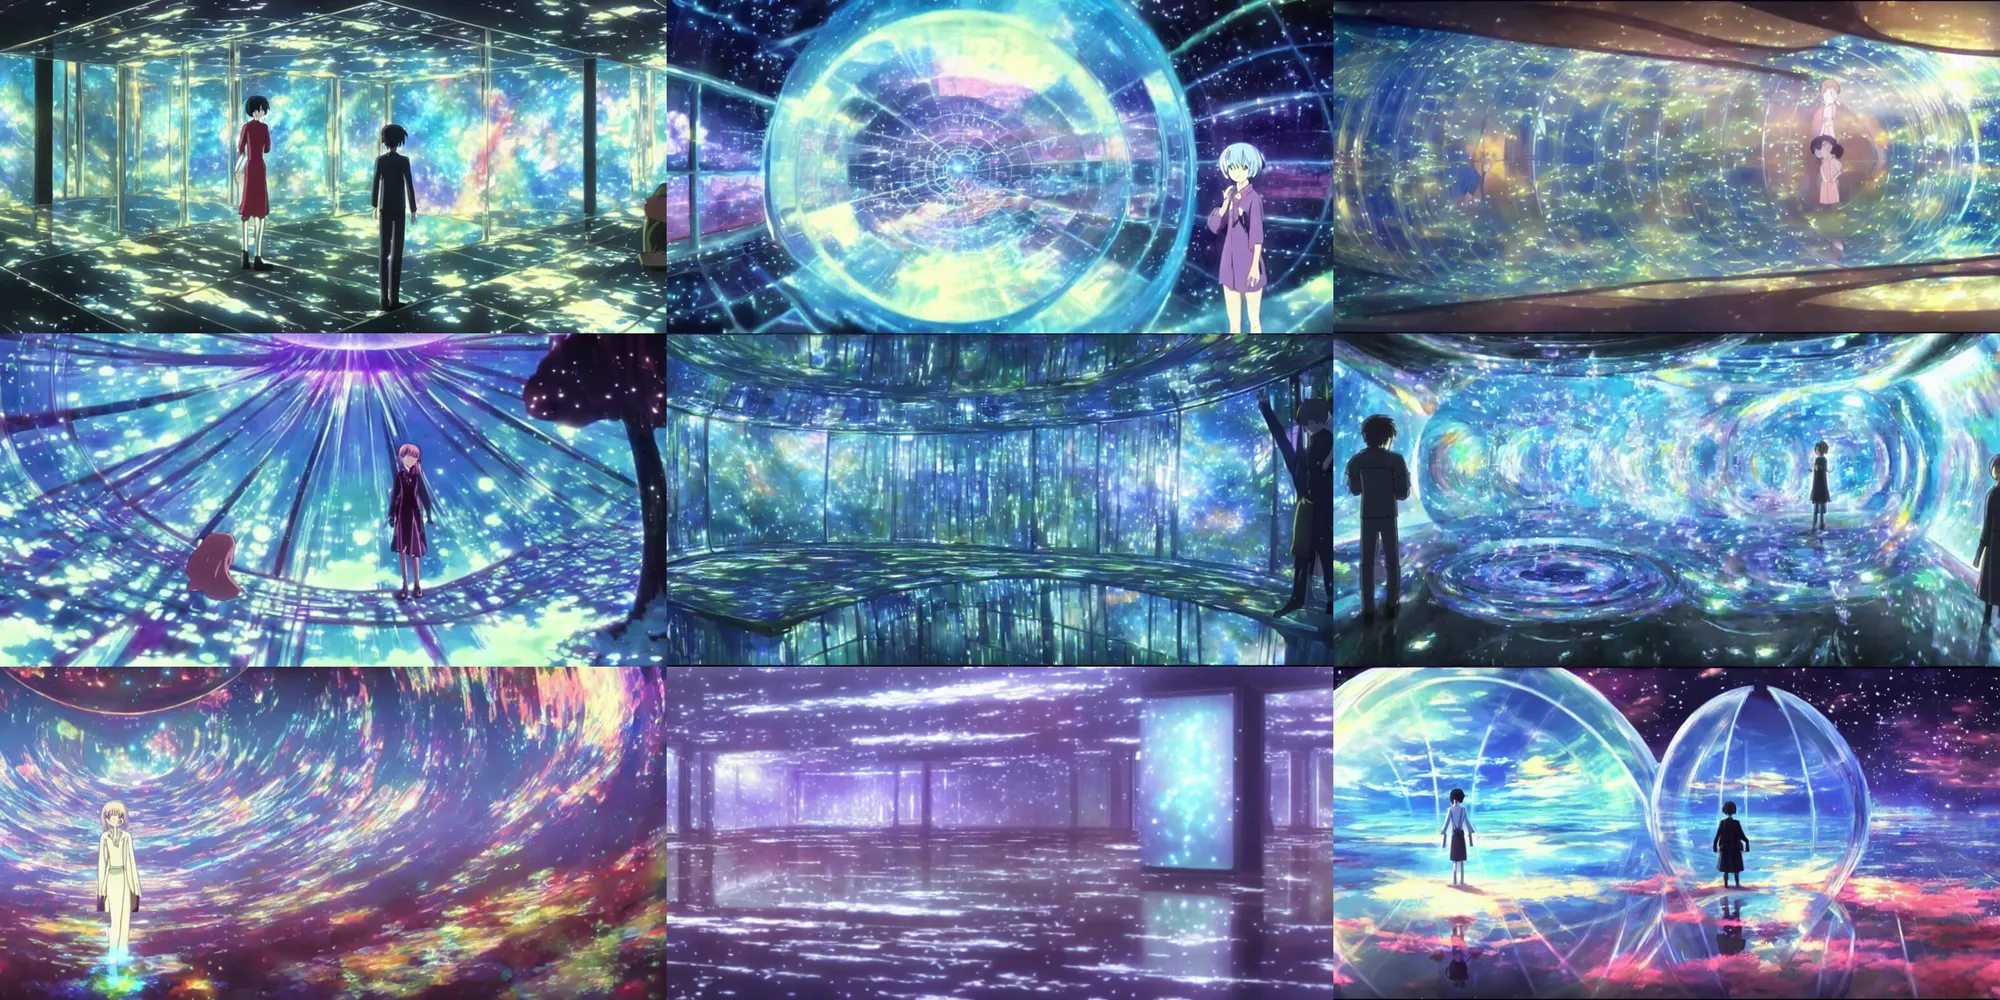 Prompt: a painting of inside the glass prism ; a beyond - dimensional fantasy world, in a screenshot from the science fiction anime film